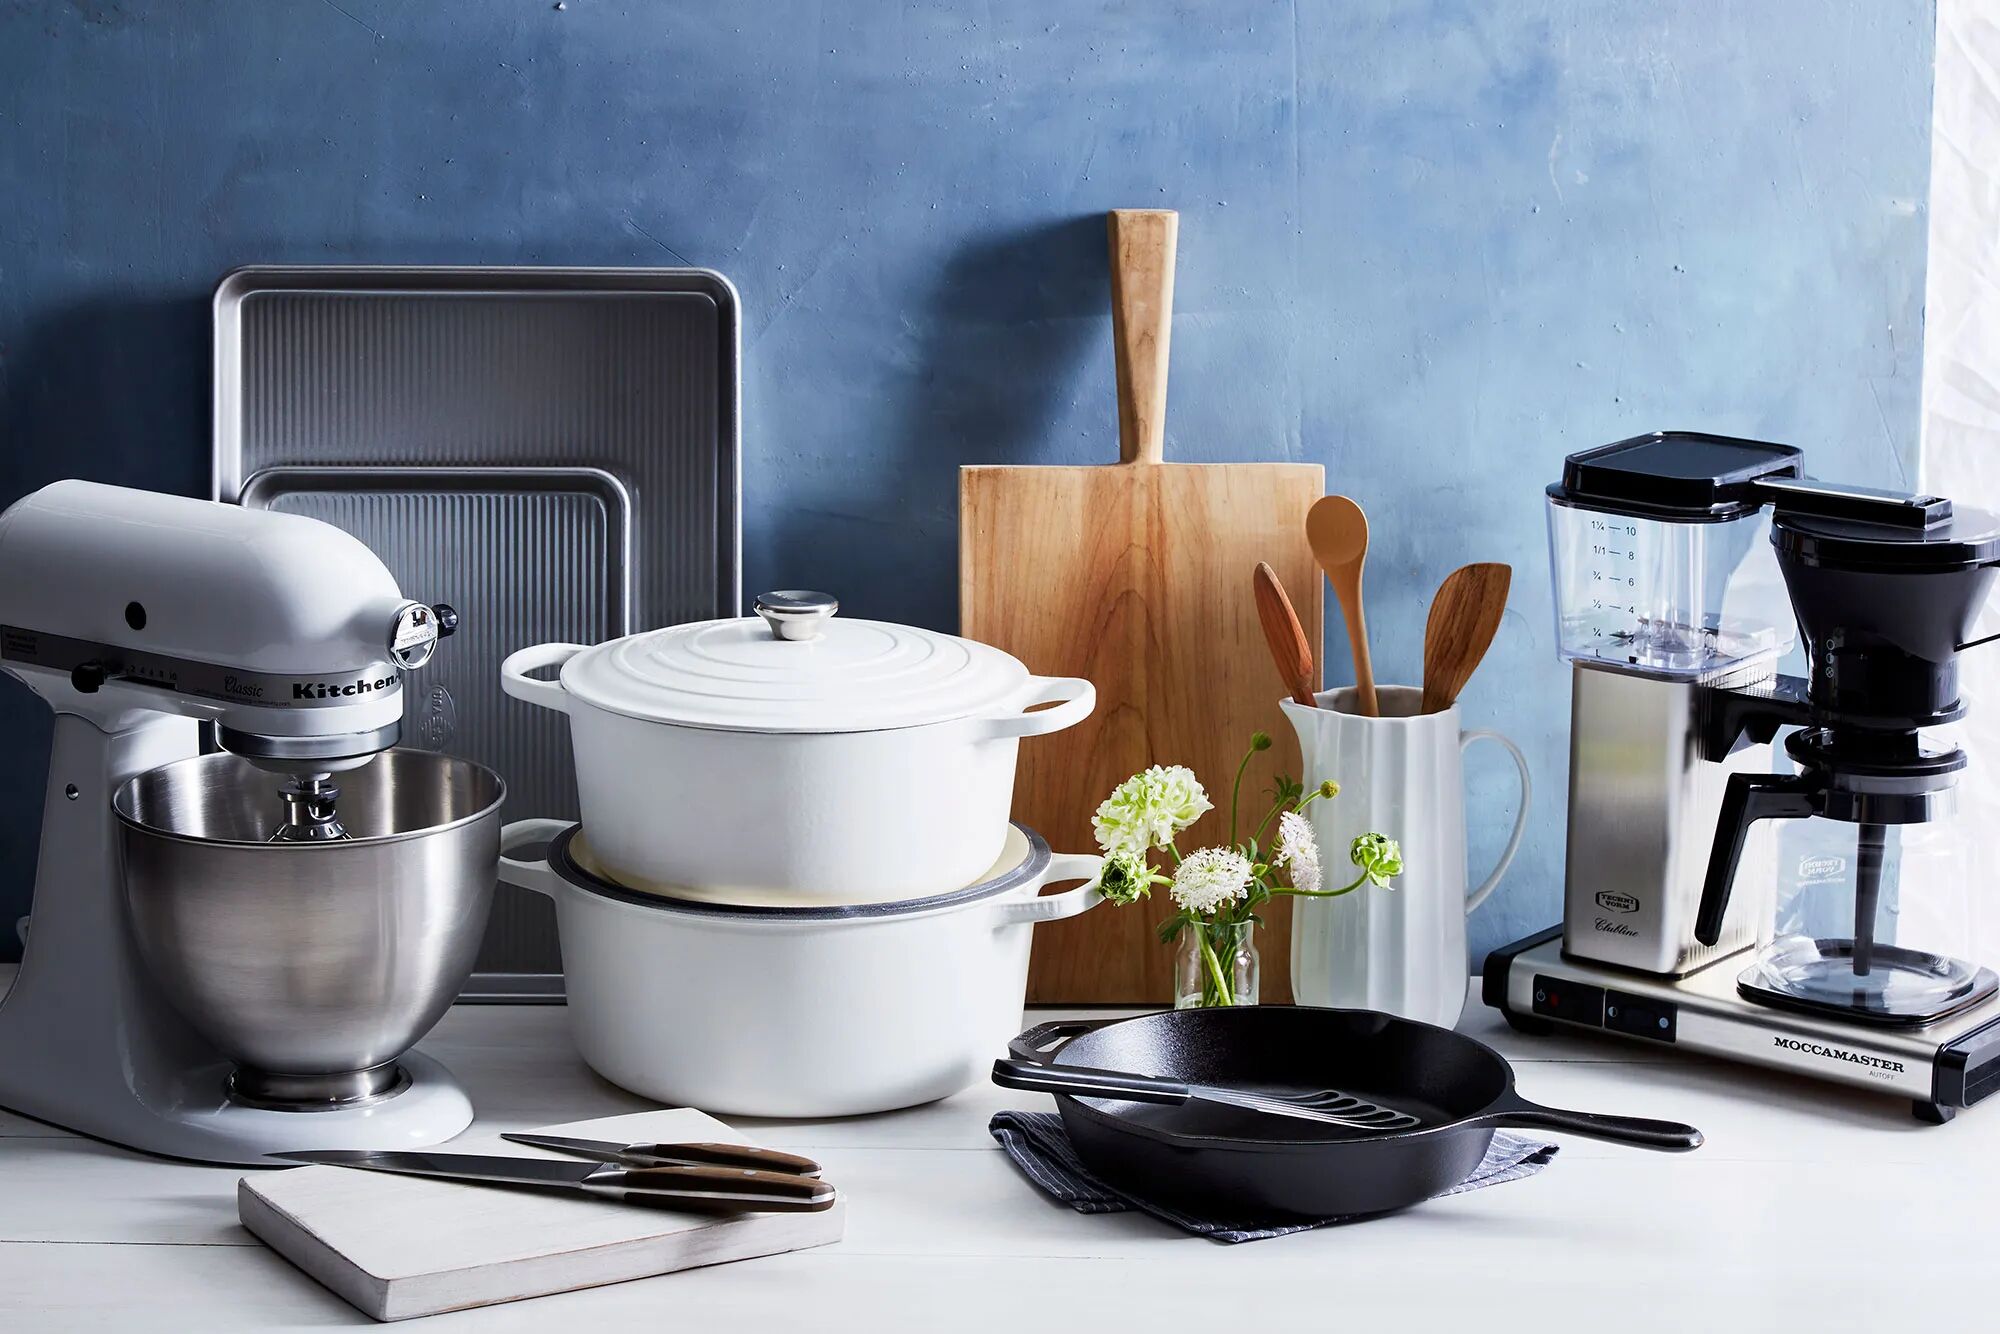 kitchen-items-for-your-wedding-registry